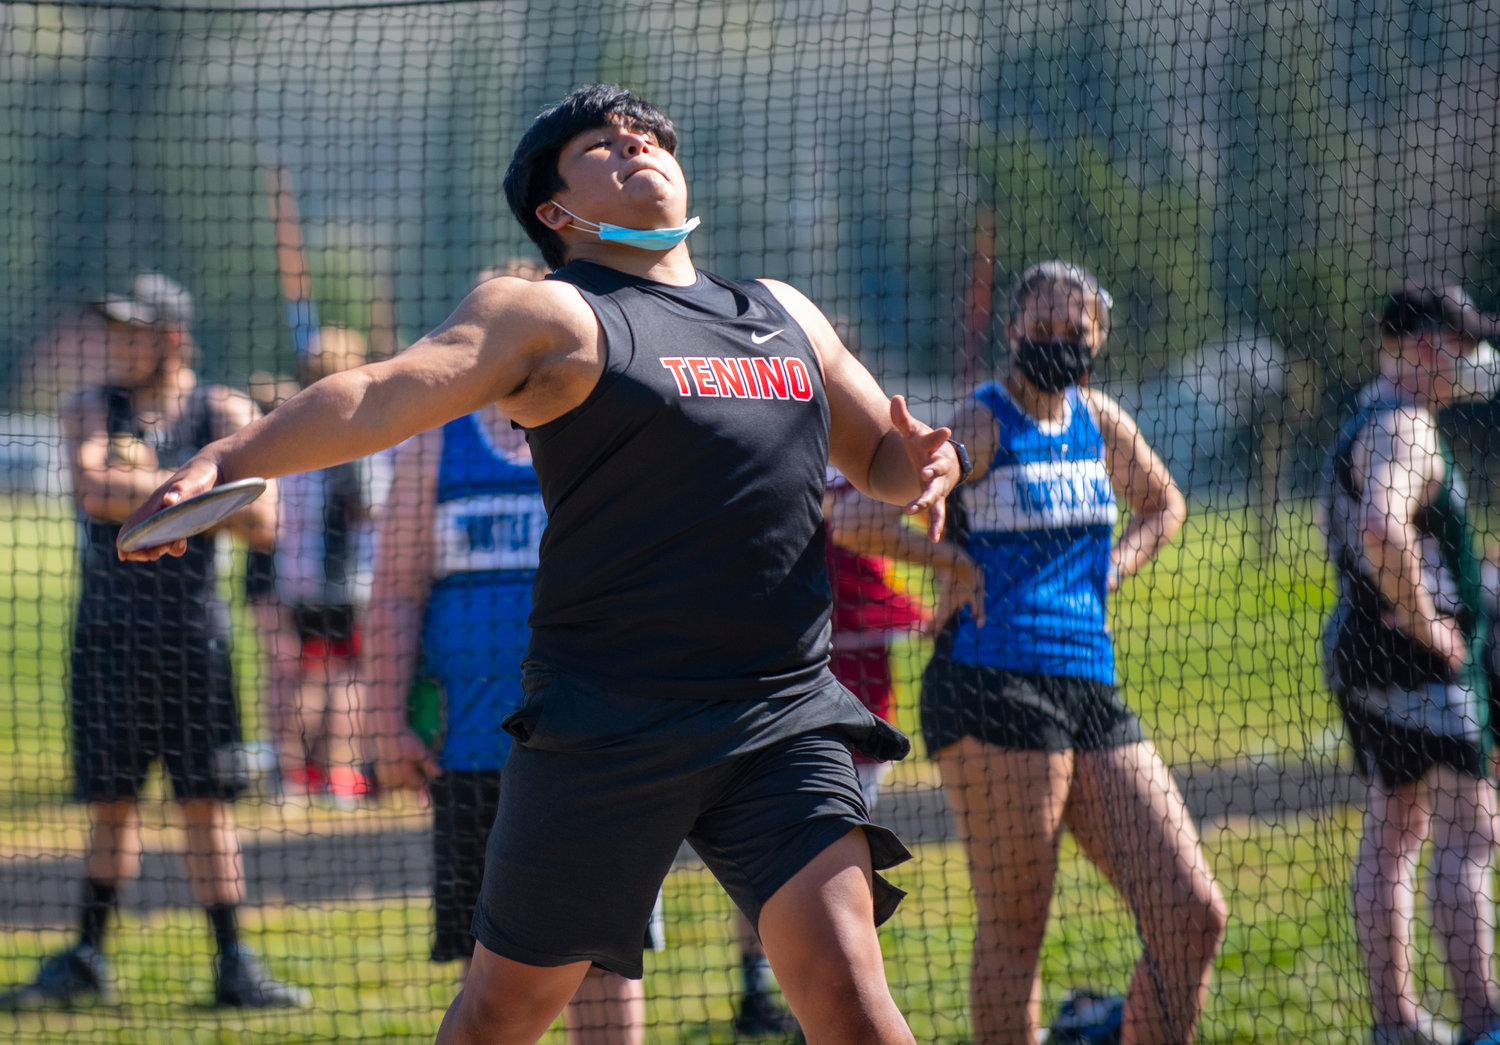 Tenino's Andres Zamudio tosses the discus on Thursday in Mossyrock.